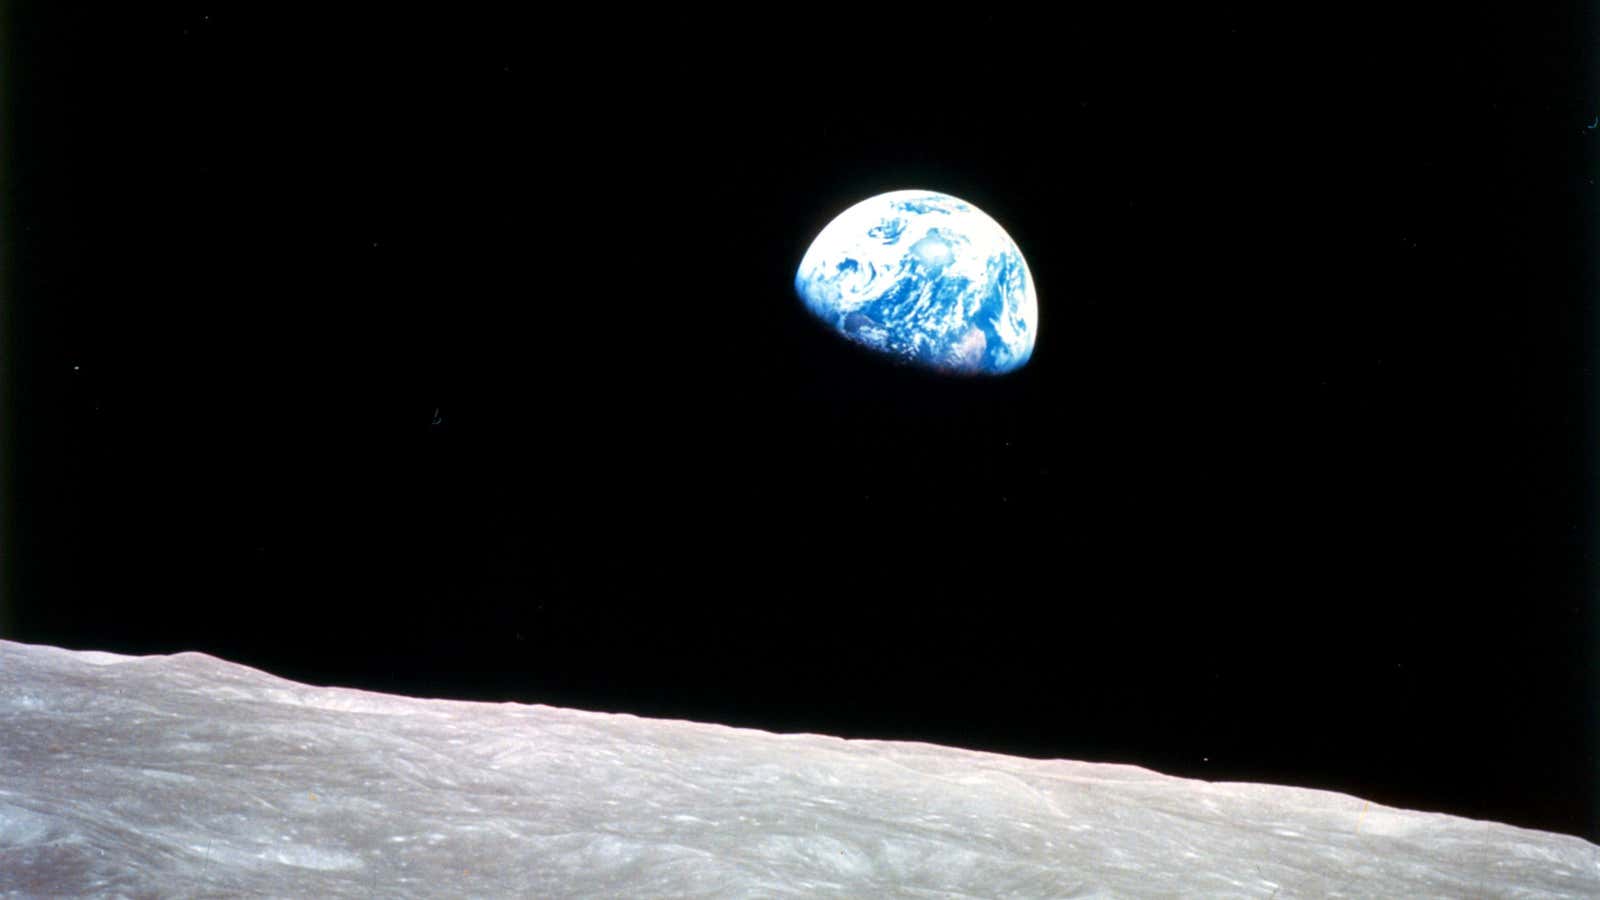 Aside from the 238,900 miles between us and the Moon, how far have we really come?